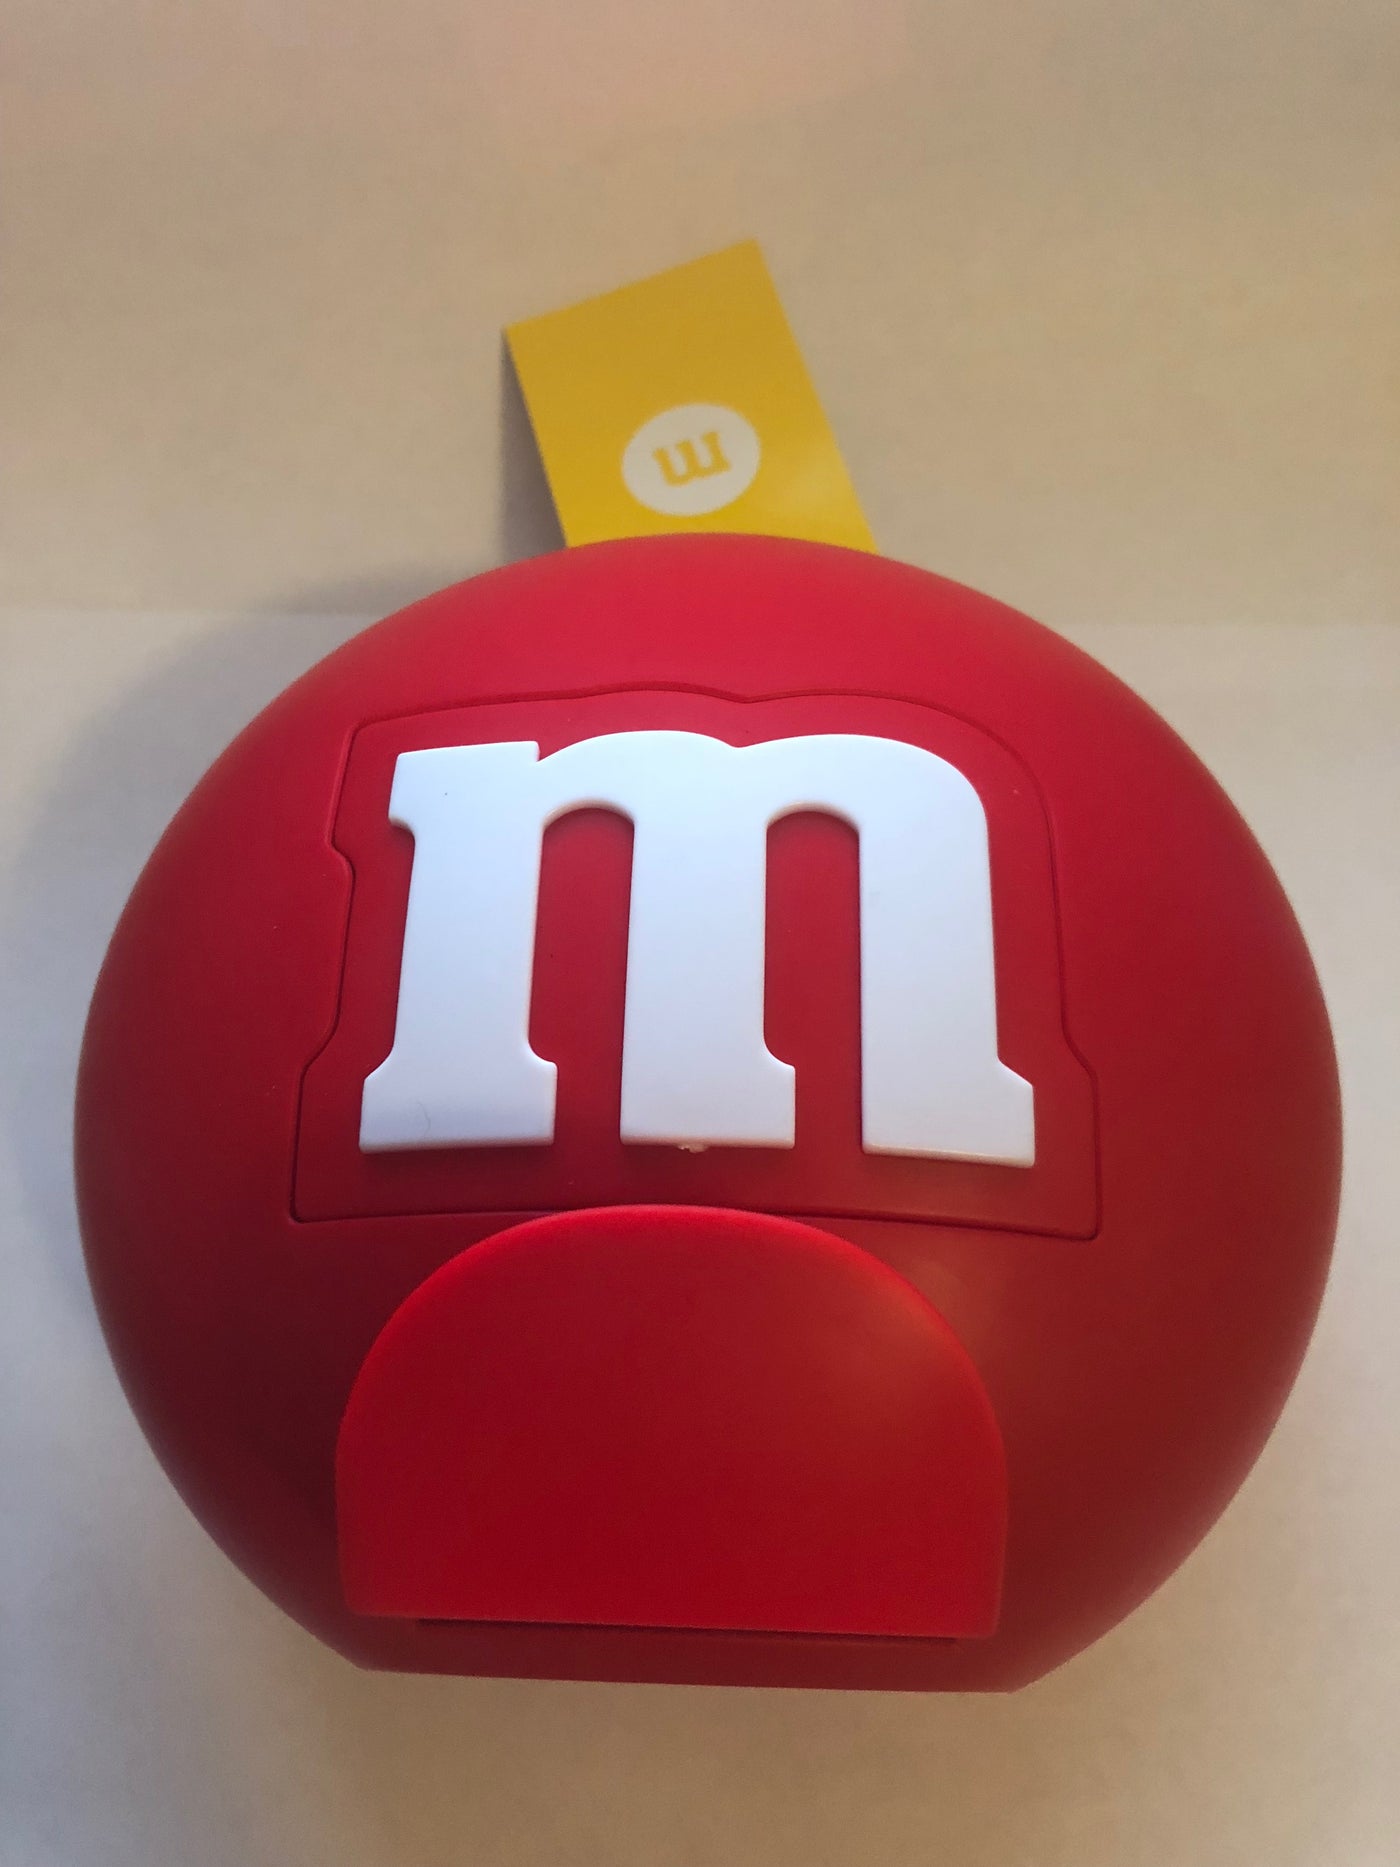 M&M's World Candy Red Round Dispenser New with Tags